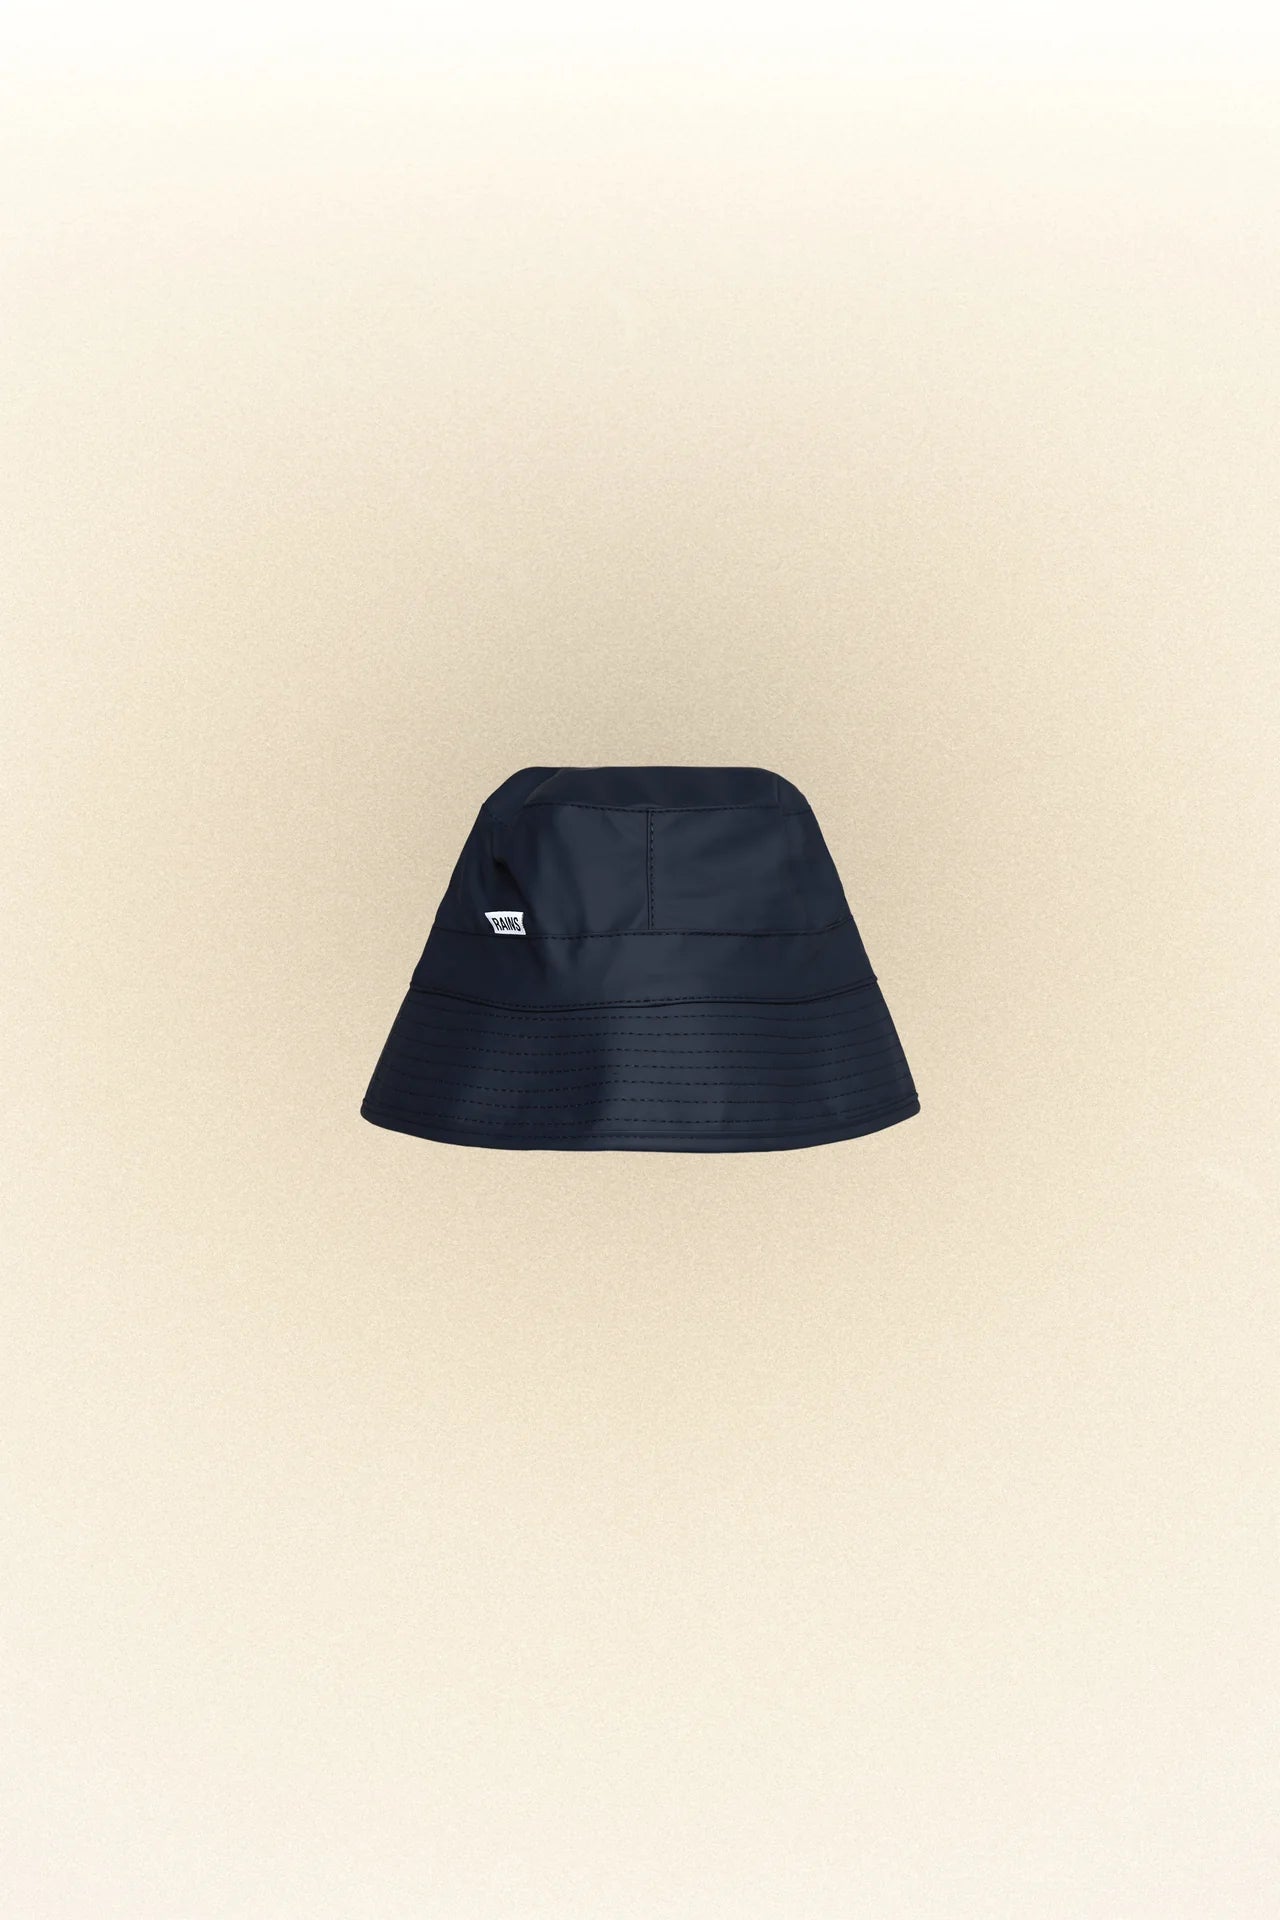 A waterproof Rains bucket hat with a polyurethane coating on a white background.